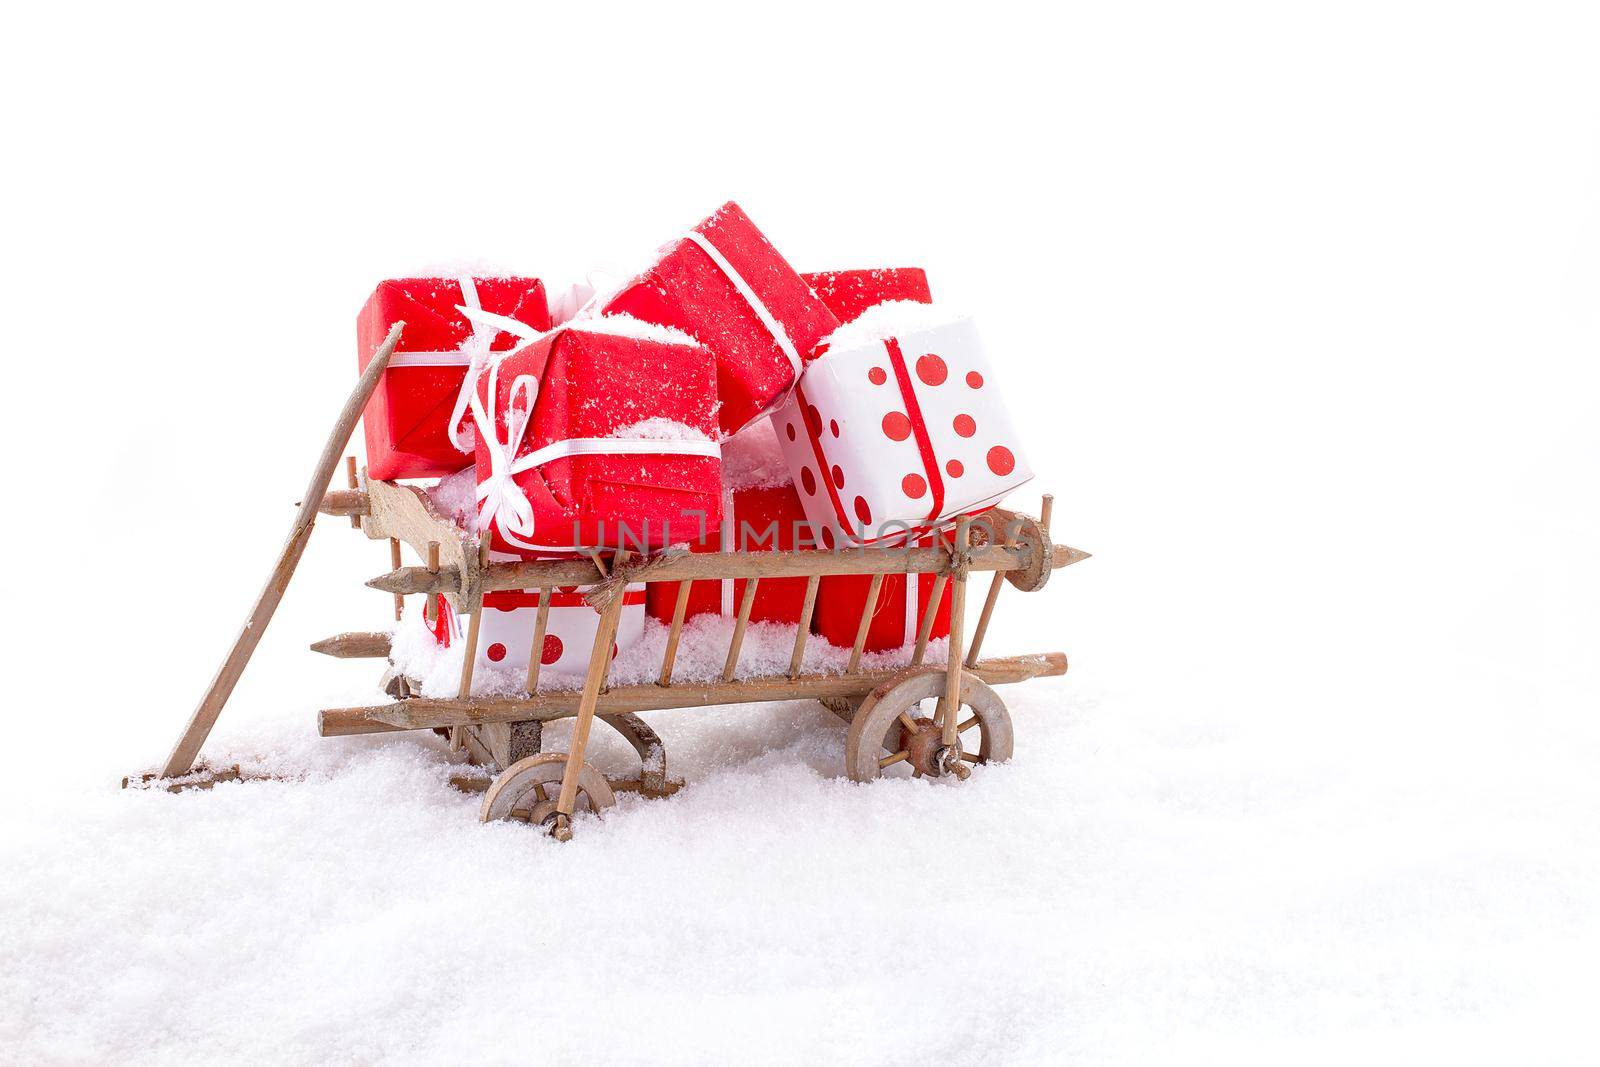 Wooden cart full of presents in the snow